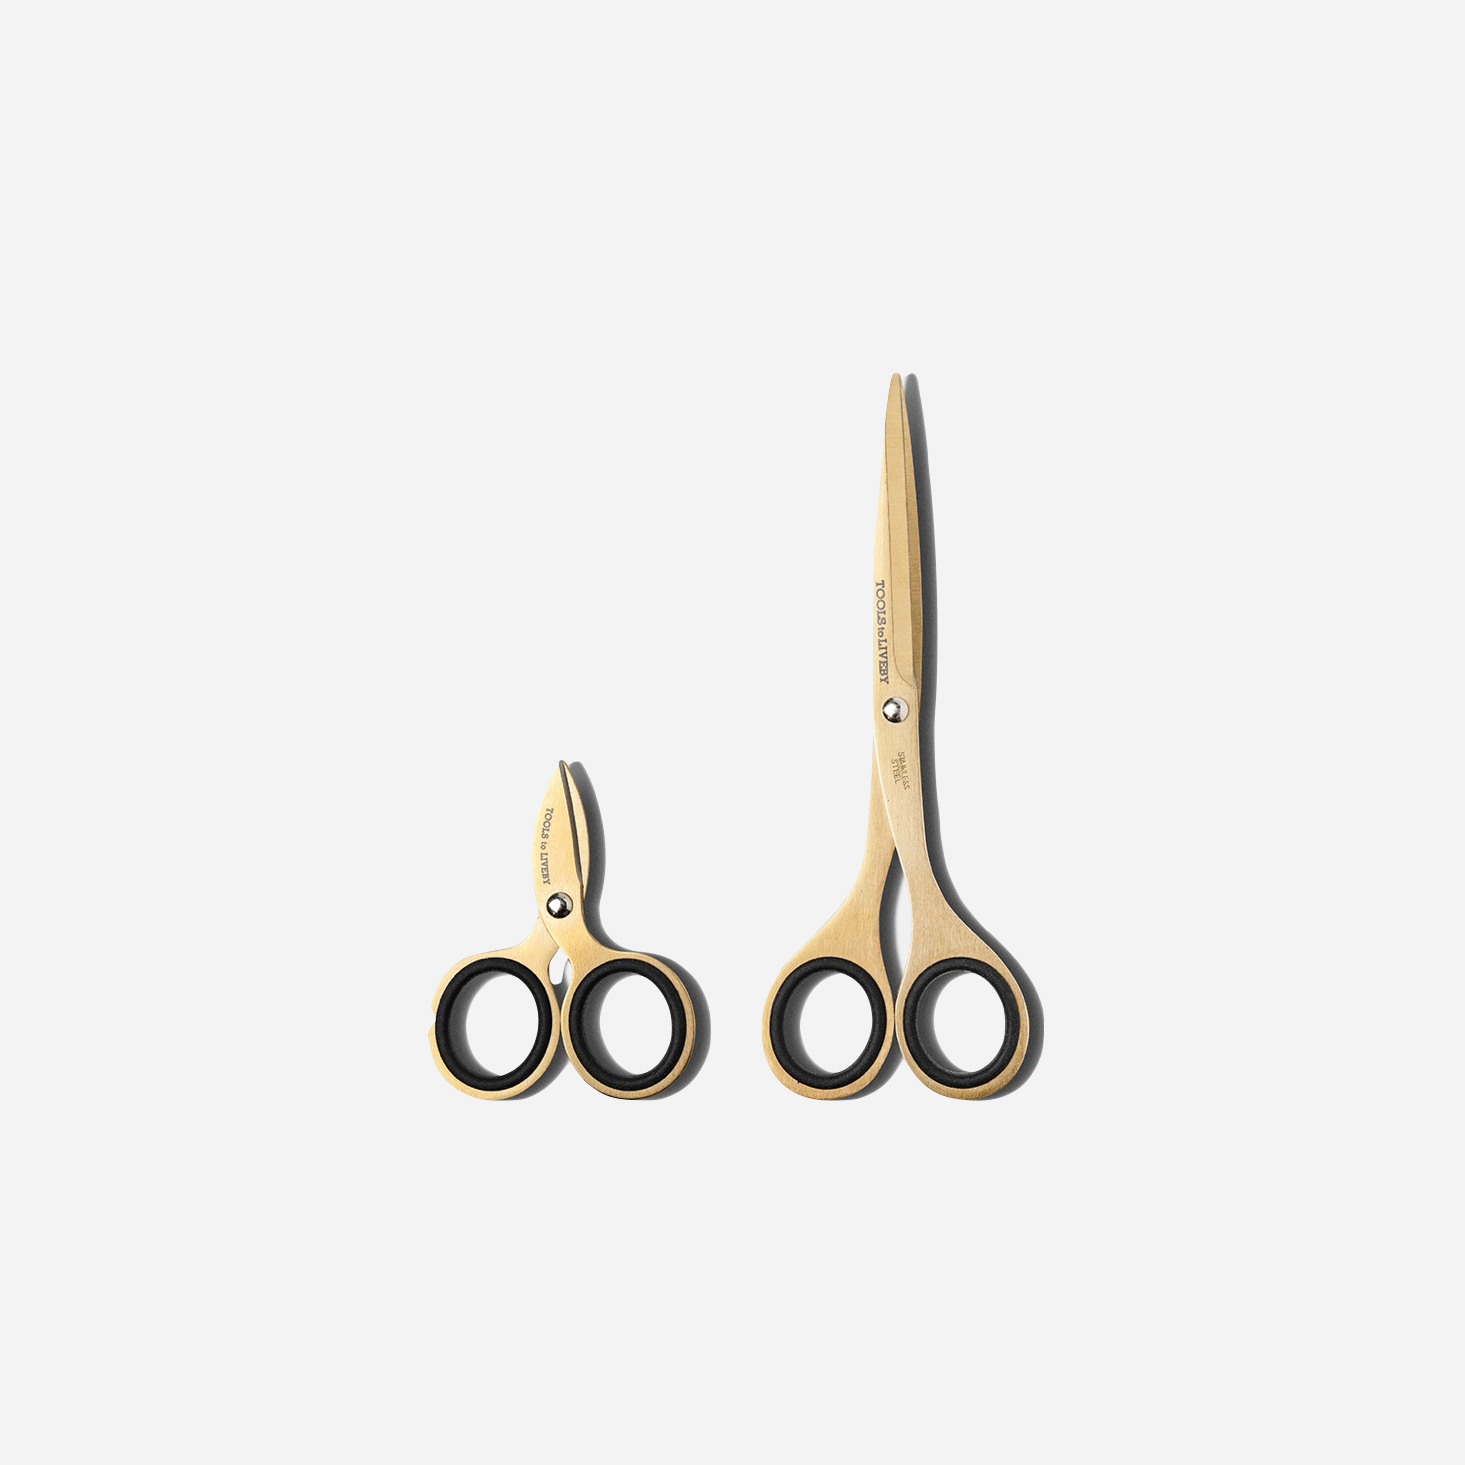 Tools to Liveby Scissors 3 GOLD